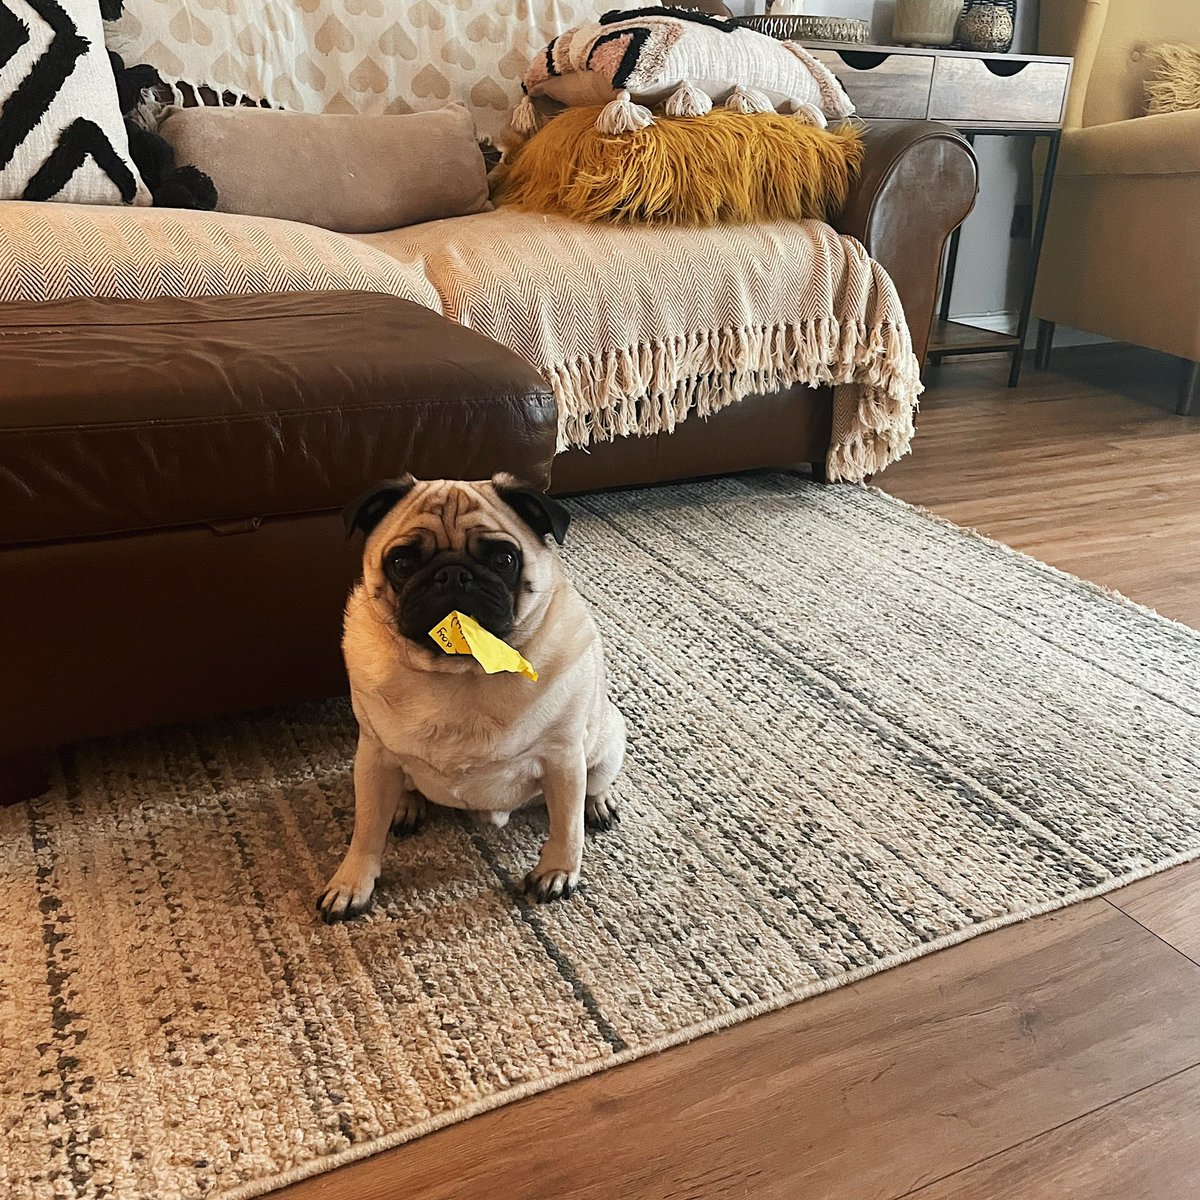 He’s got that Friday feeling.

#PPCPug #WFH #DogAtWork